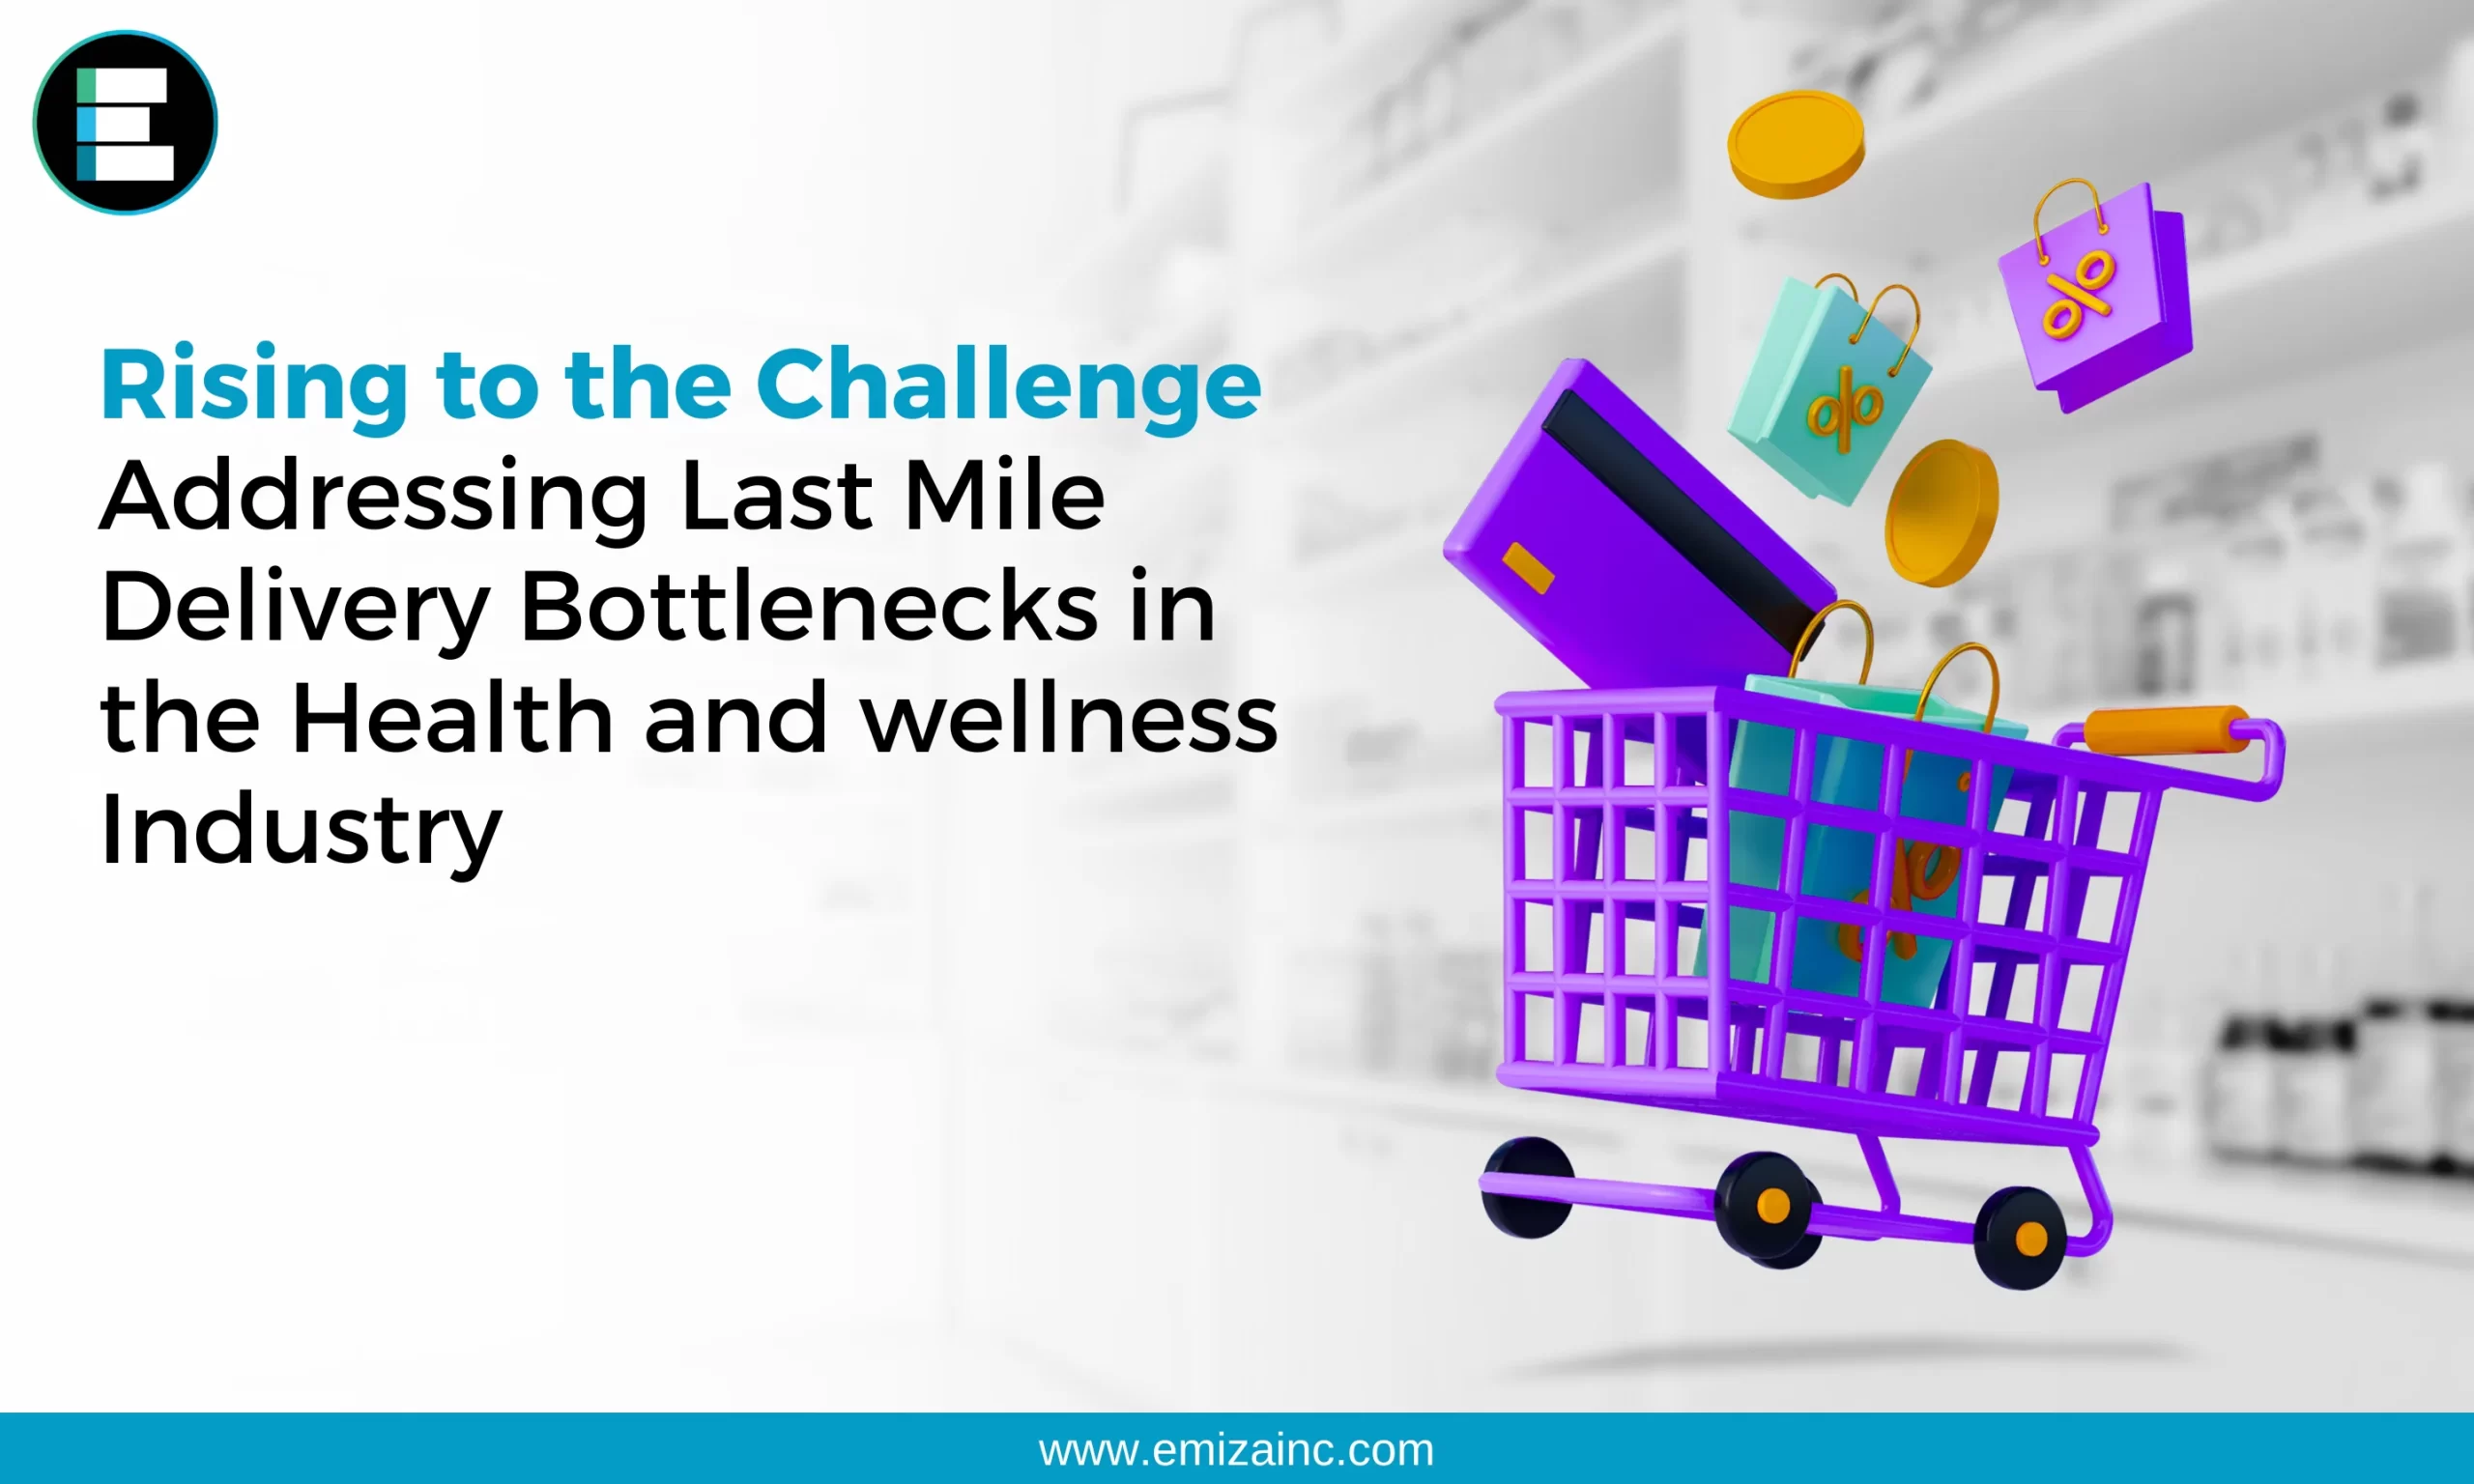 Rising to the Challenge Addressing Last Mile Delivery Bottlenecks in the Health and wellness Industry